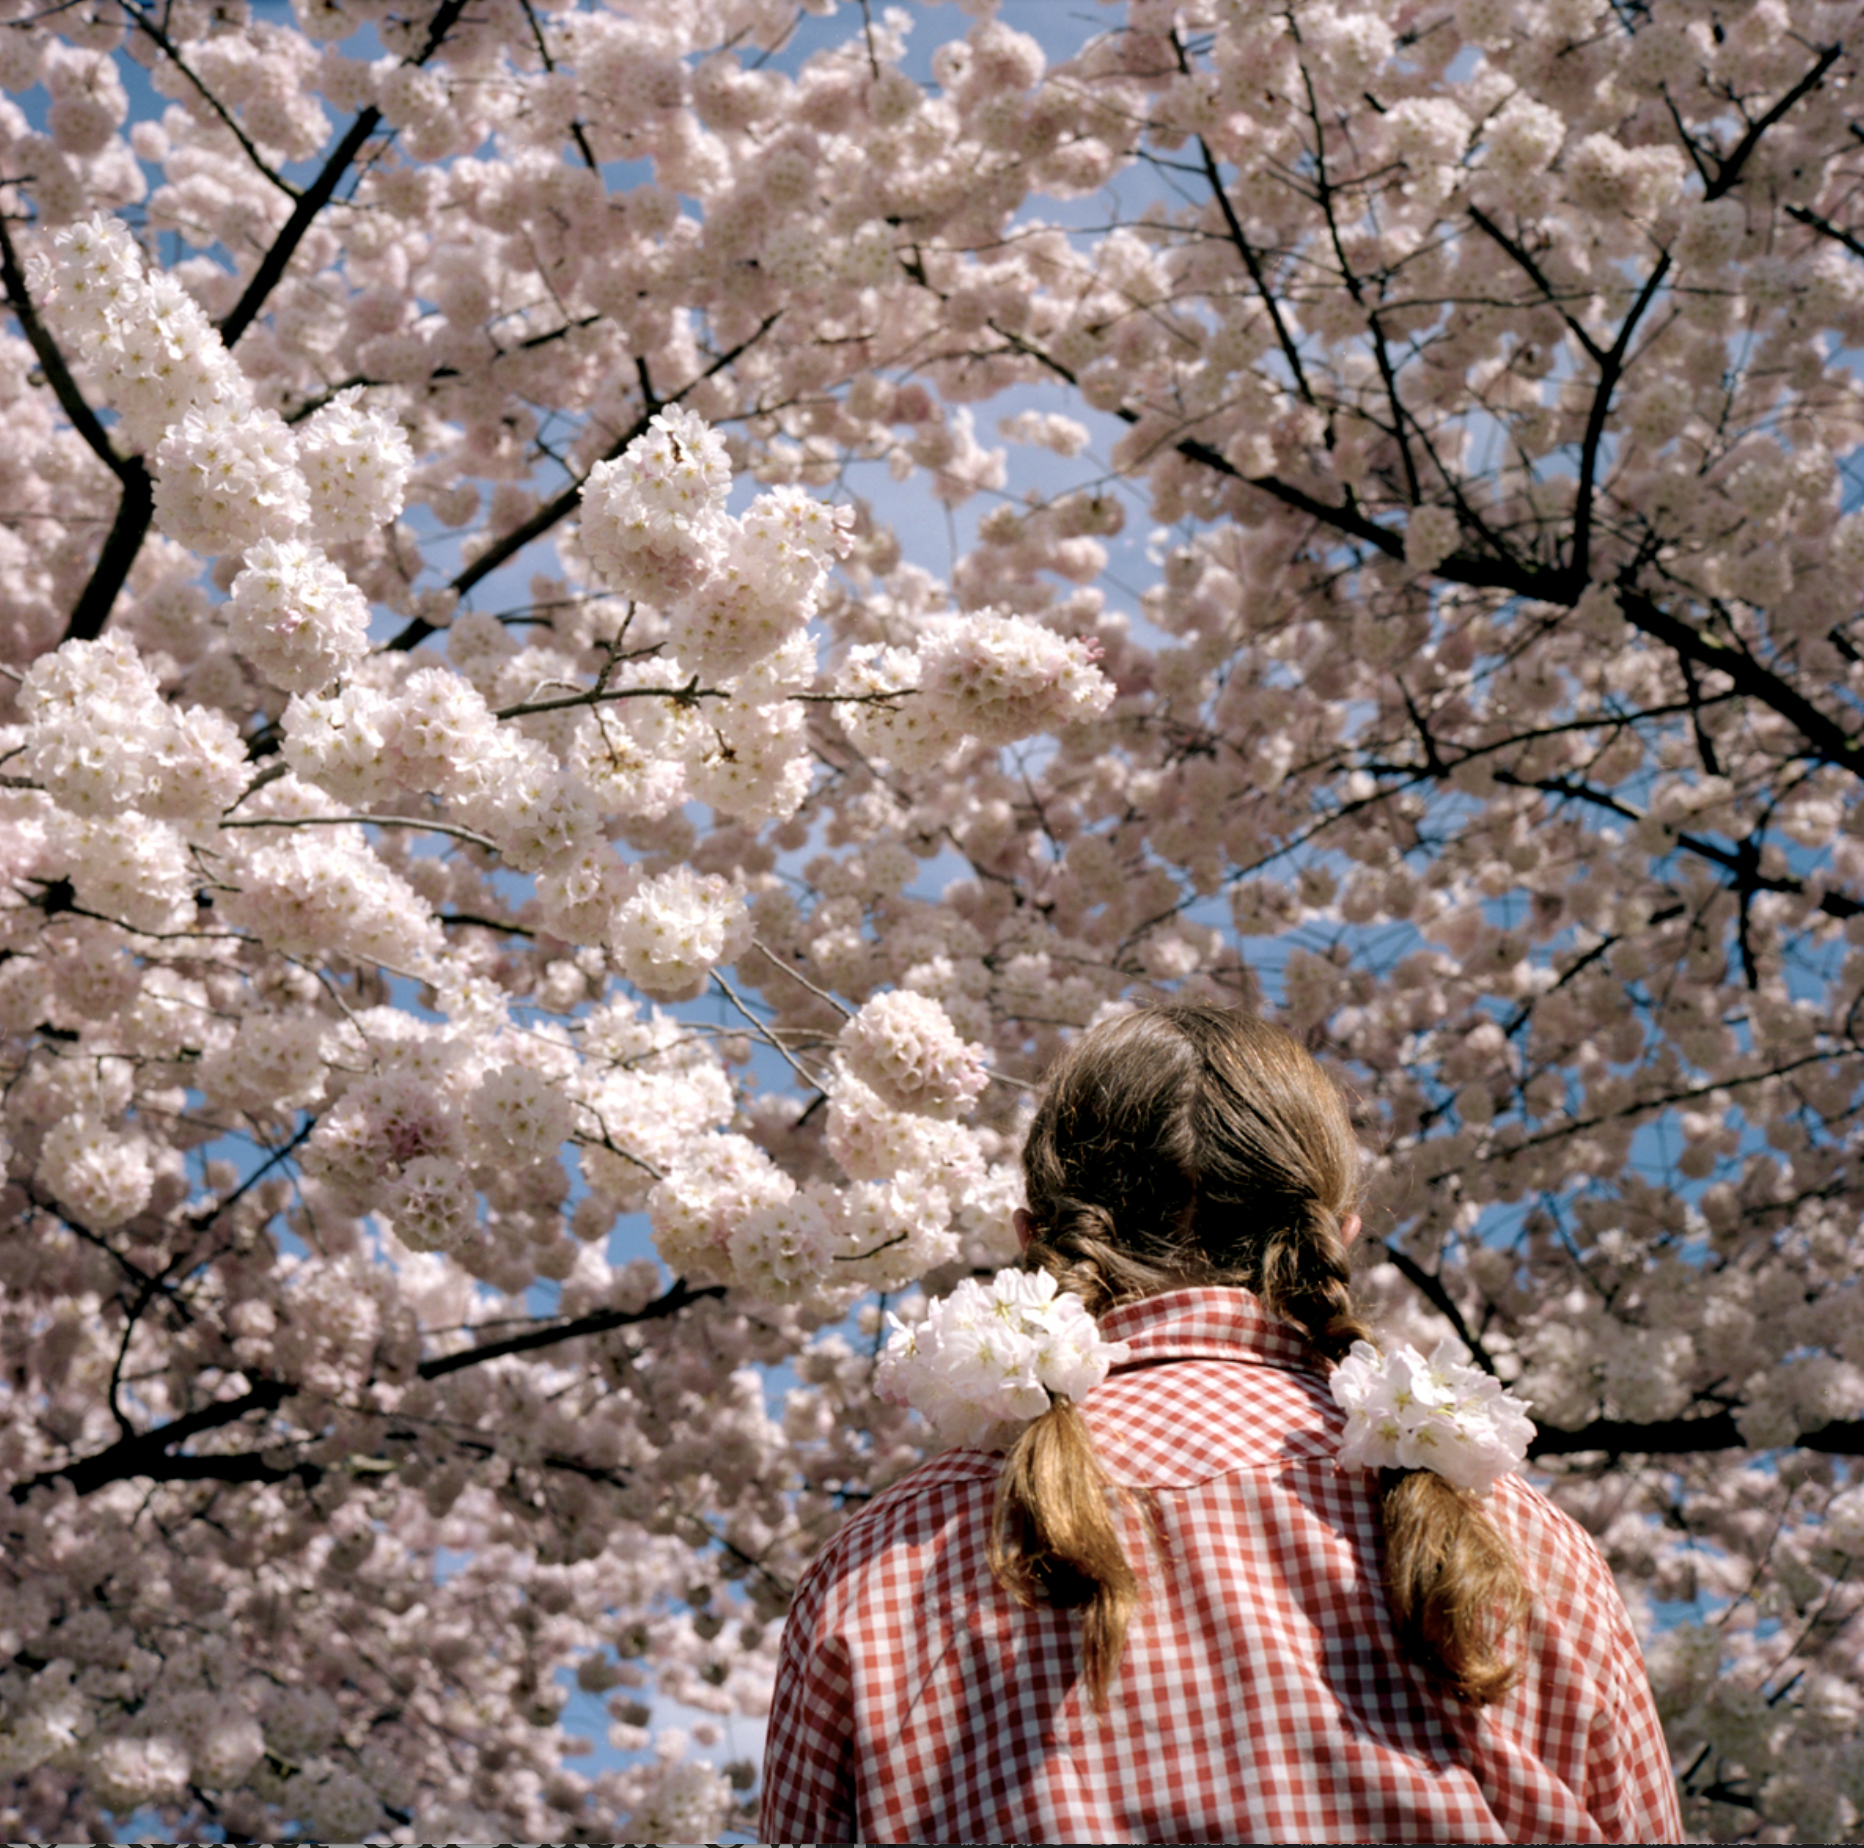 sakura sakura - cherry trees bloom while a person with pigtails and a gingham shirt look on